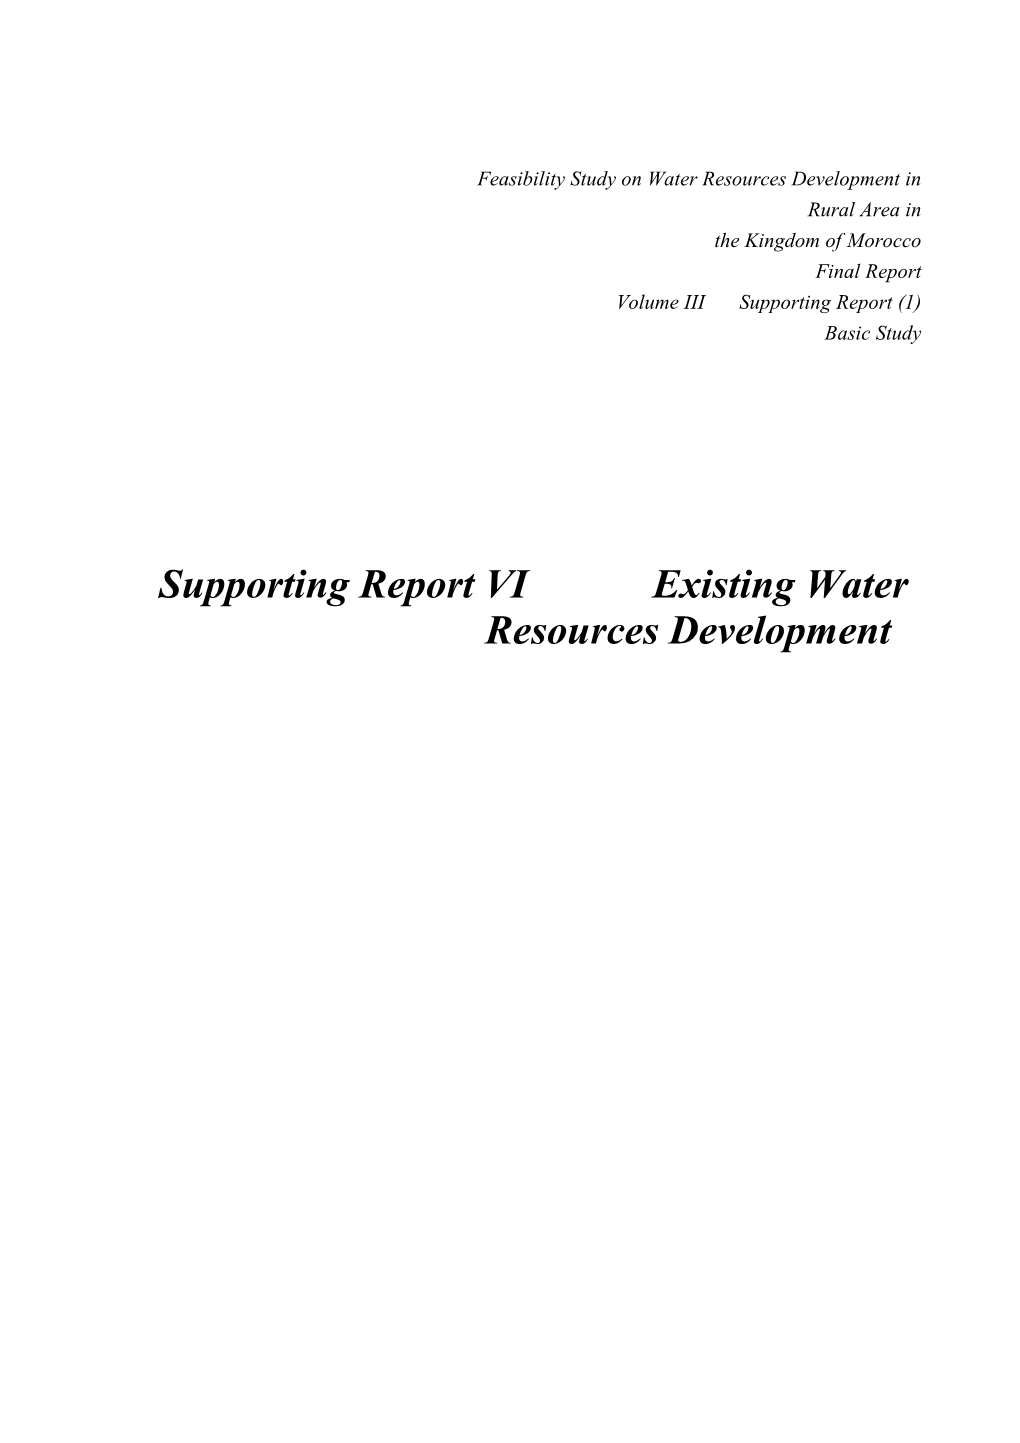 Supporting Report VI Existing Water Resources Development FEASIBILITY STUDY on WATER RESOURCES DEVELOPMENT in RURAL AREA in the KINGDOM of MOROCCO